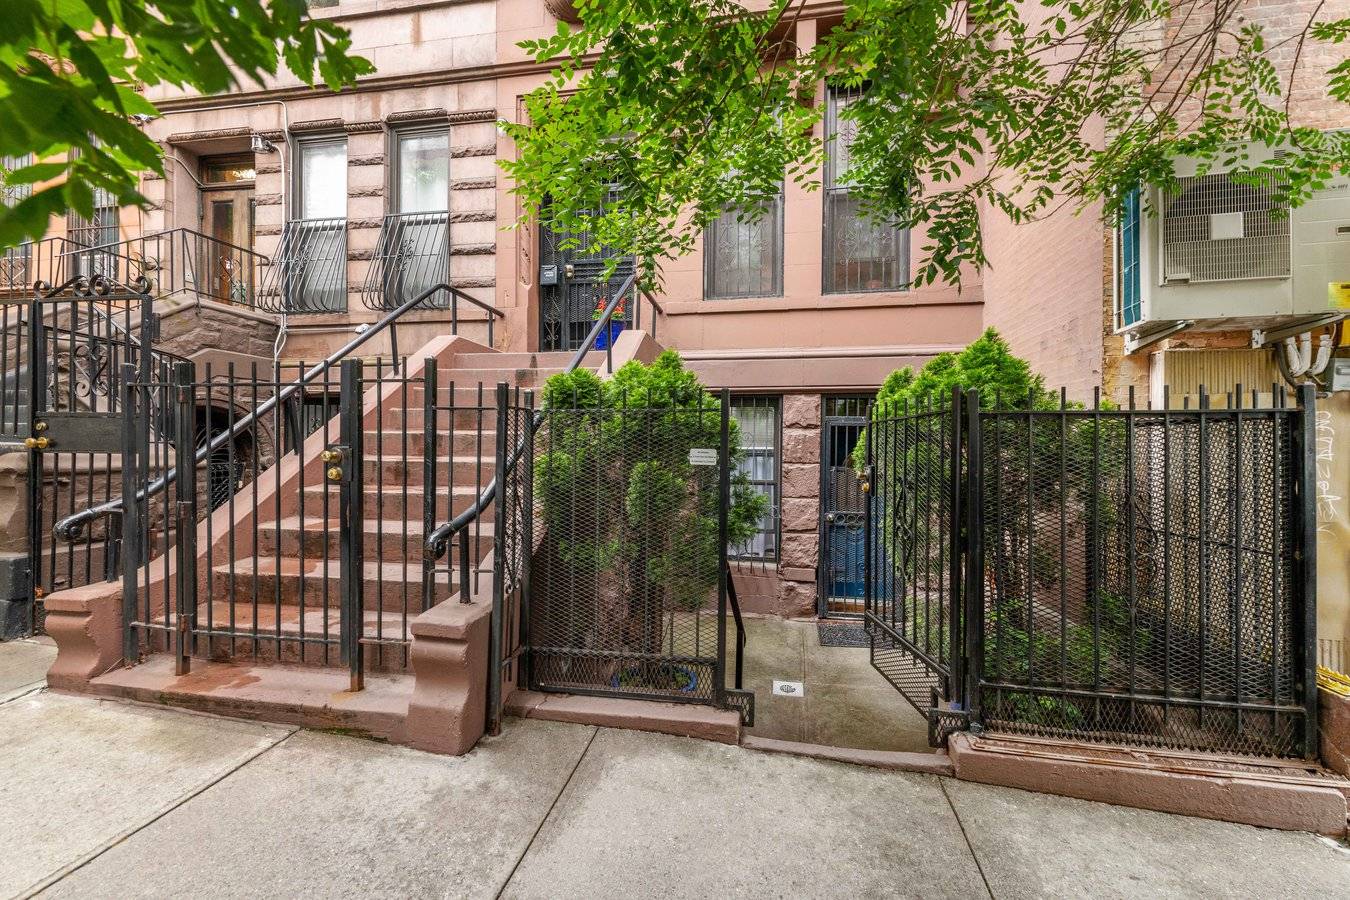 This turn key, beautifully renovated brownstone is currently configured as a 2 family home but is a legal 3 family dwelling.